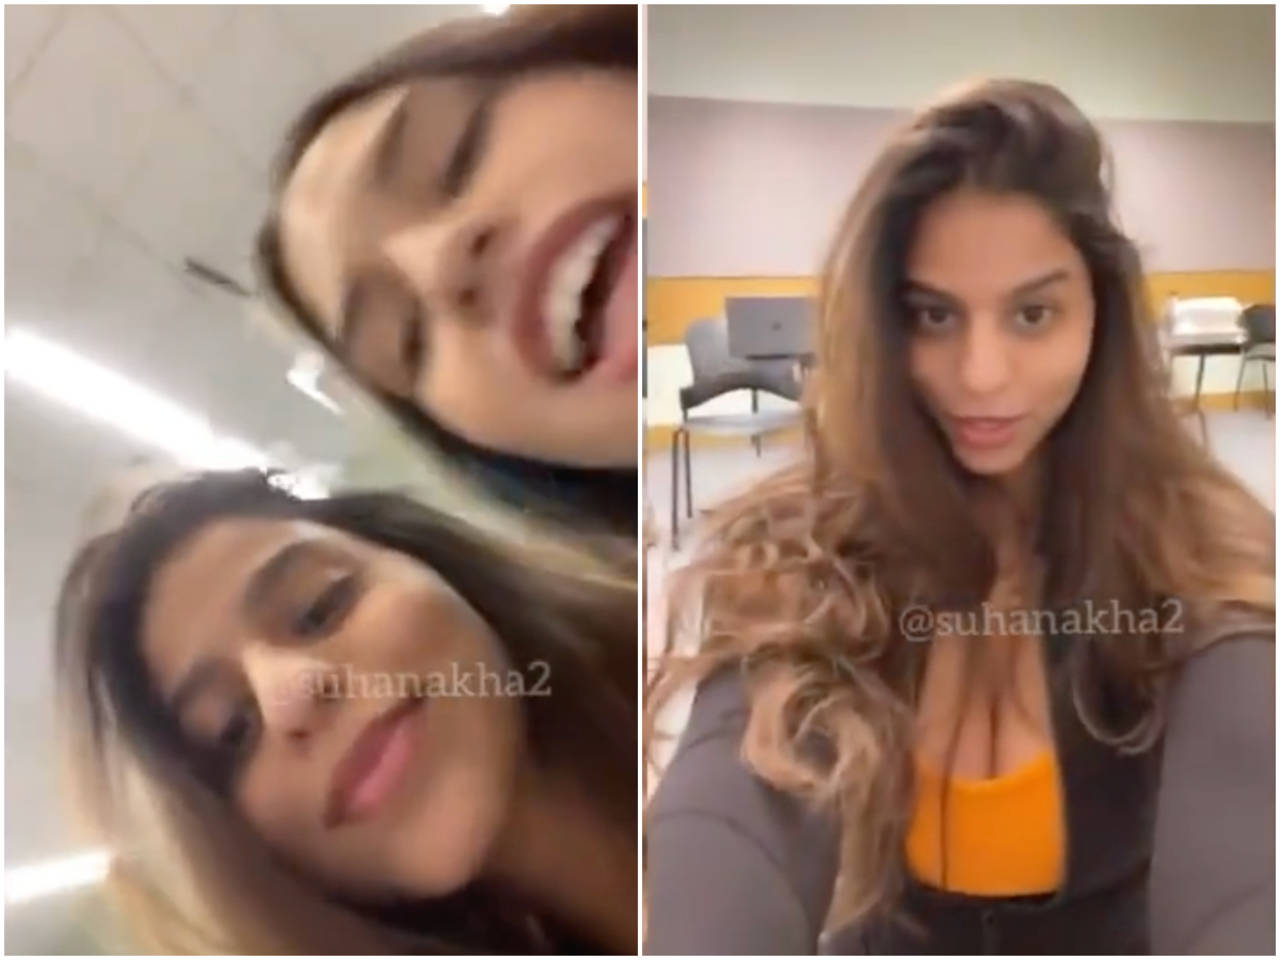 Suhana Khan stops to take selfies with fans. Fans say 'she looks